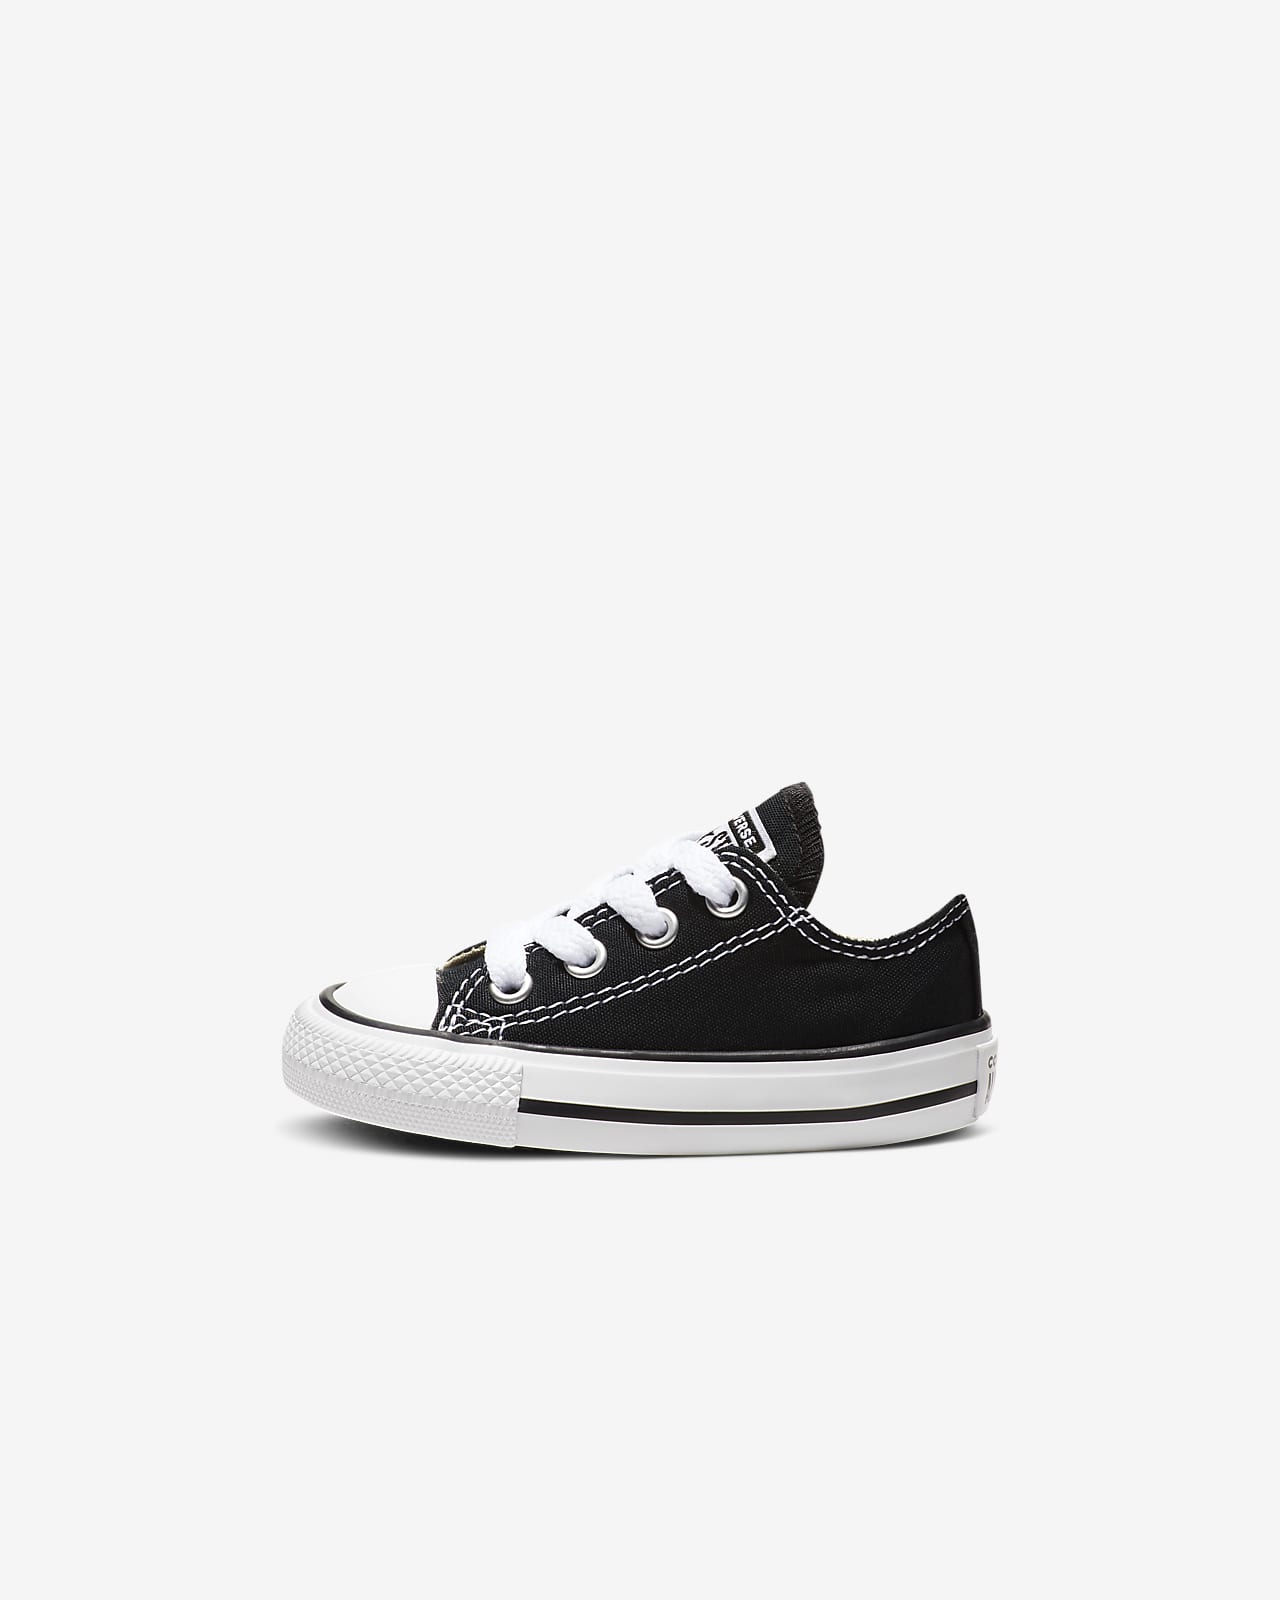 Korridor Periodisk forfatter Converse Chuck Taylor All Star Low Top Infant/Toddler Shoe. Nike.com